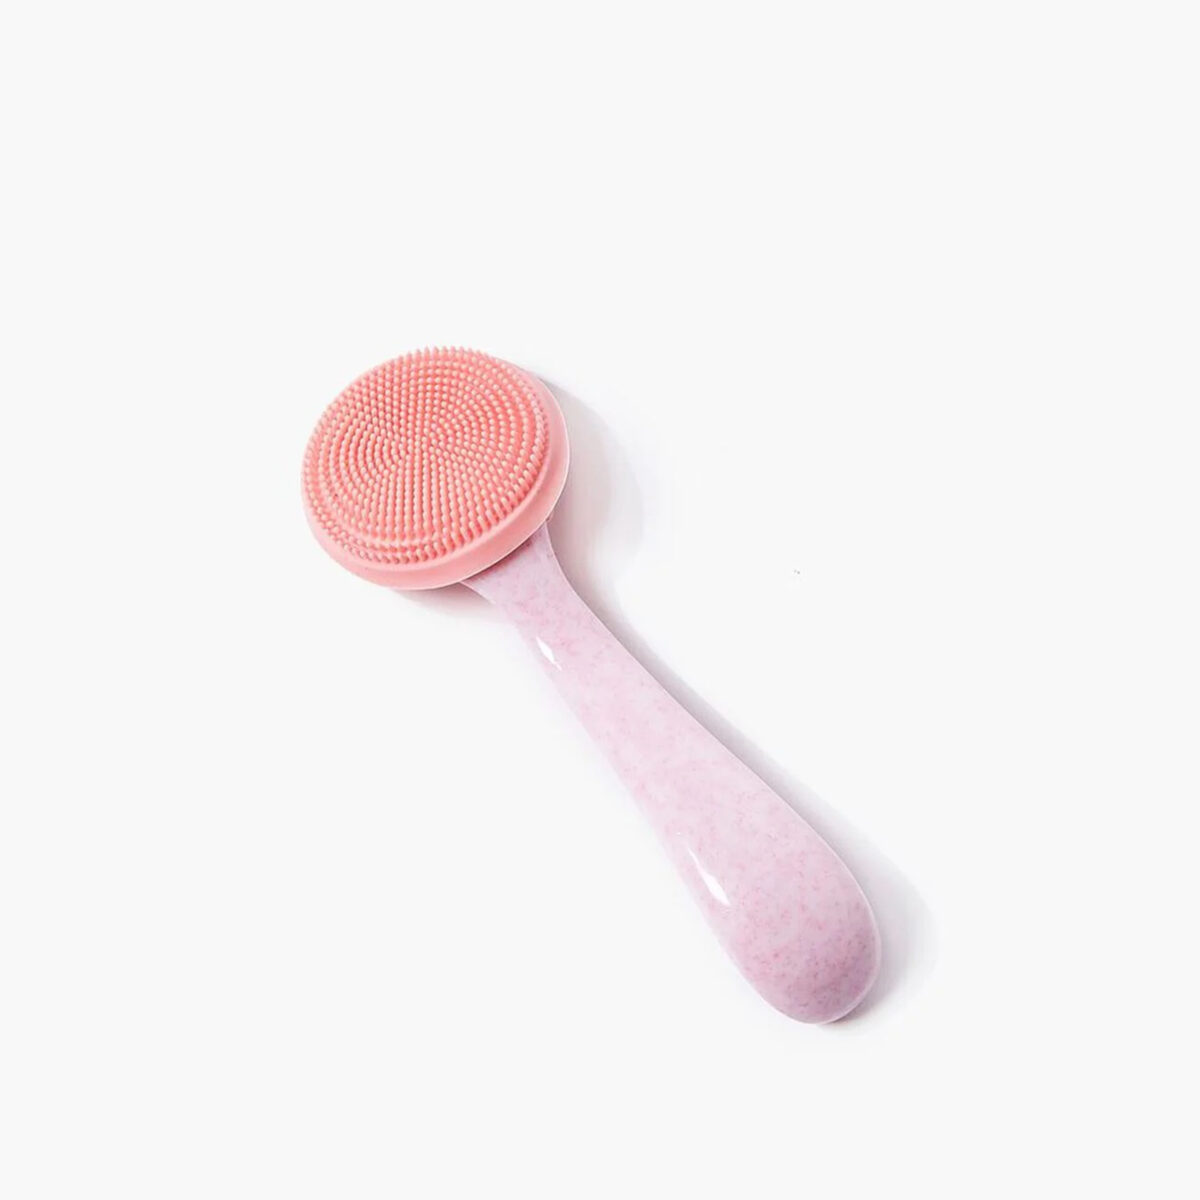 Curved long handle silicone facial cleansing brush فرشاة تنظيف وجه سيليكون